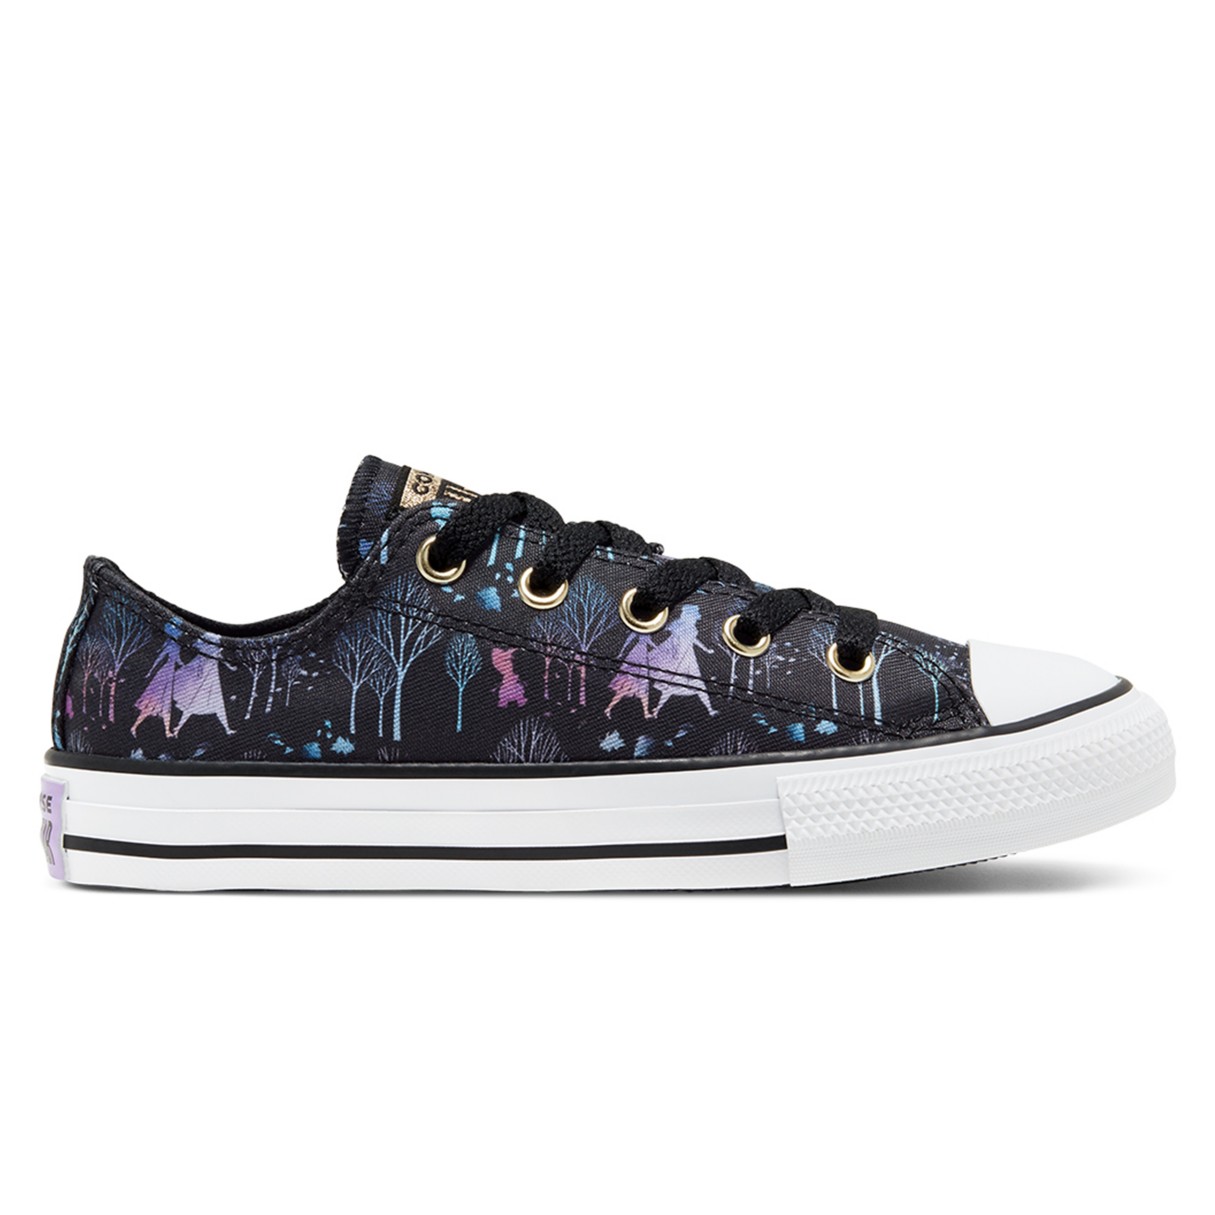 Frozen 2 Low-Top Sneakers for Kids by Converse – Black